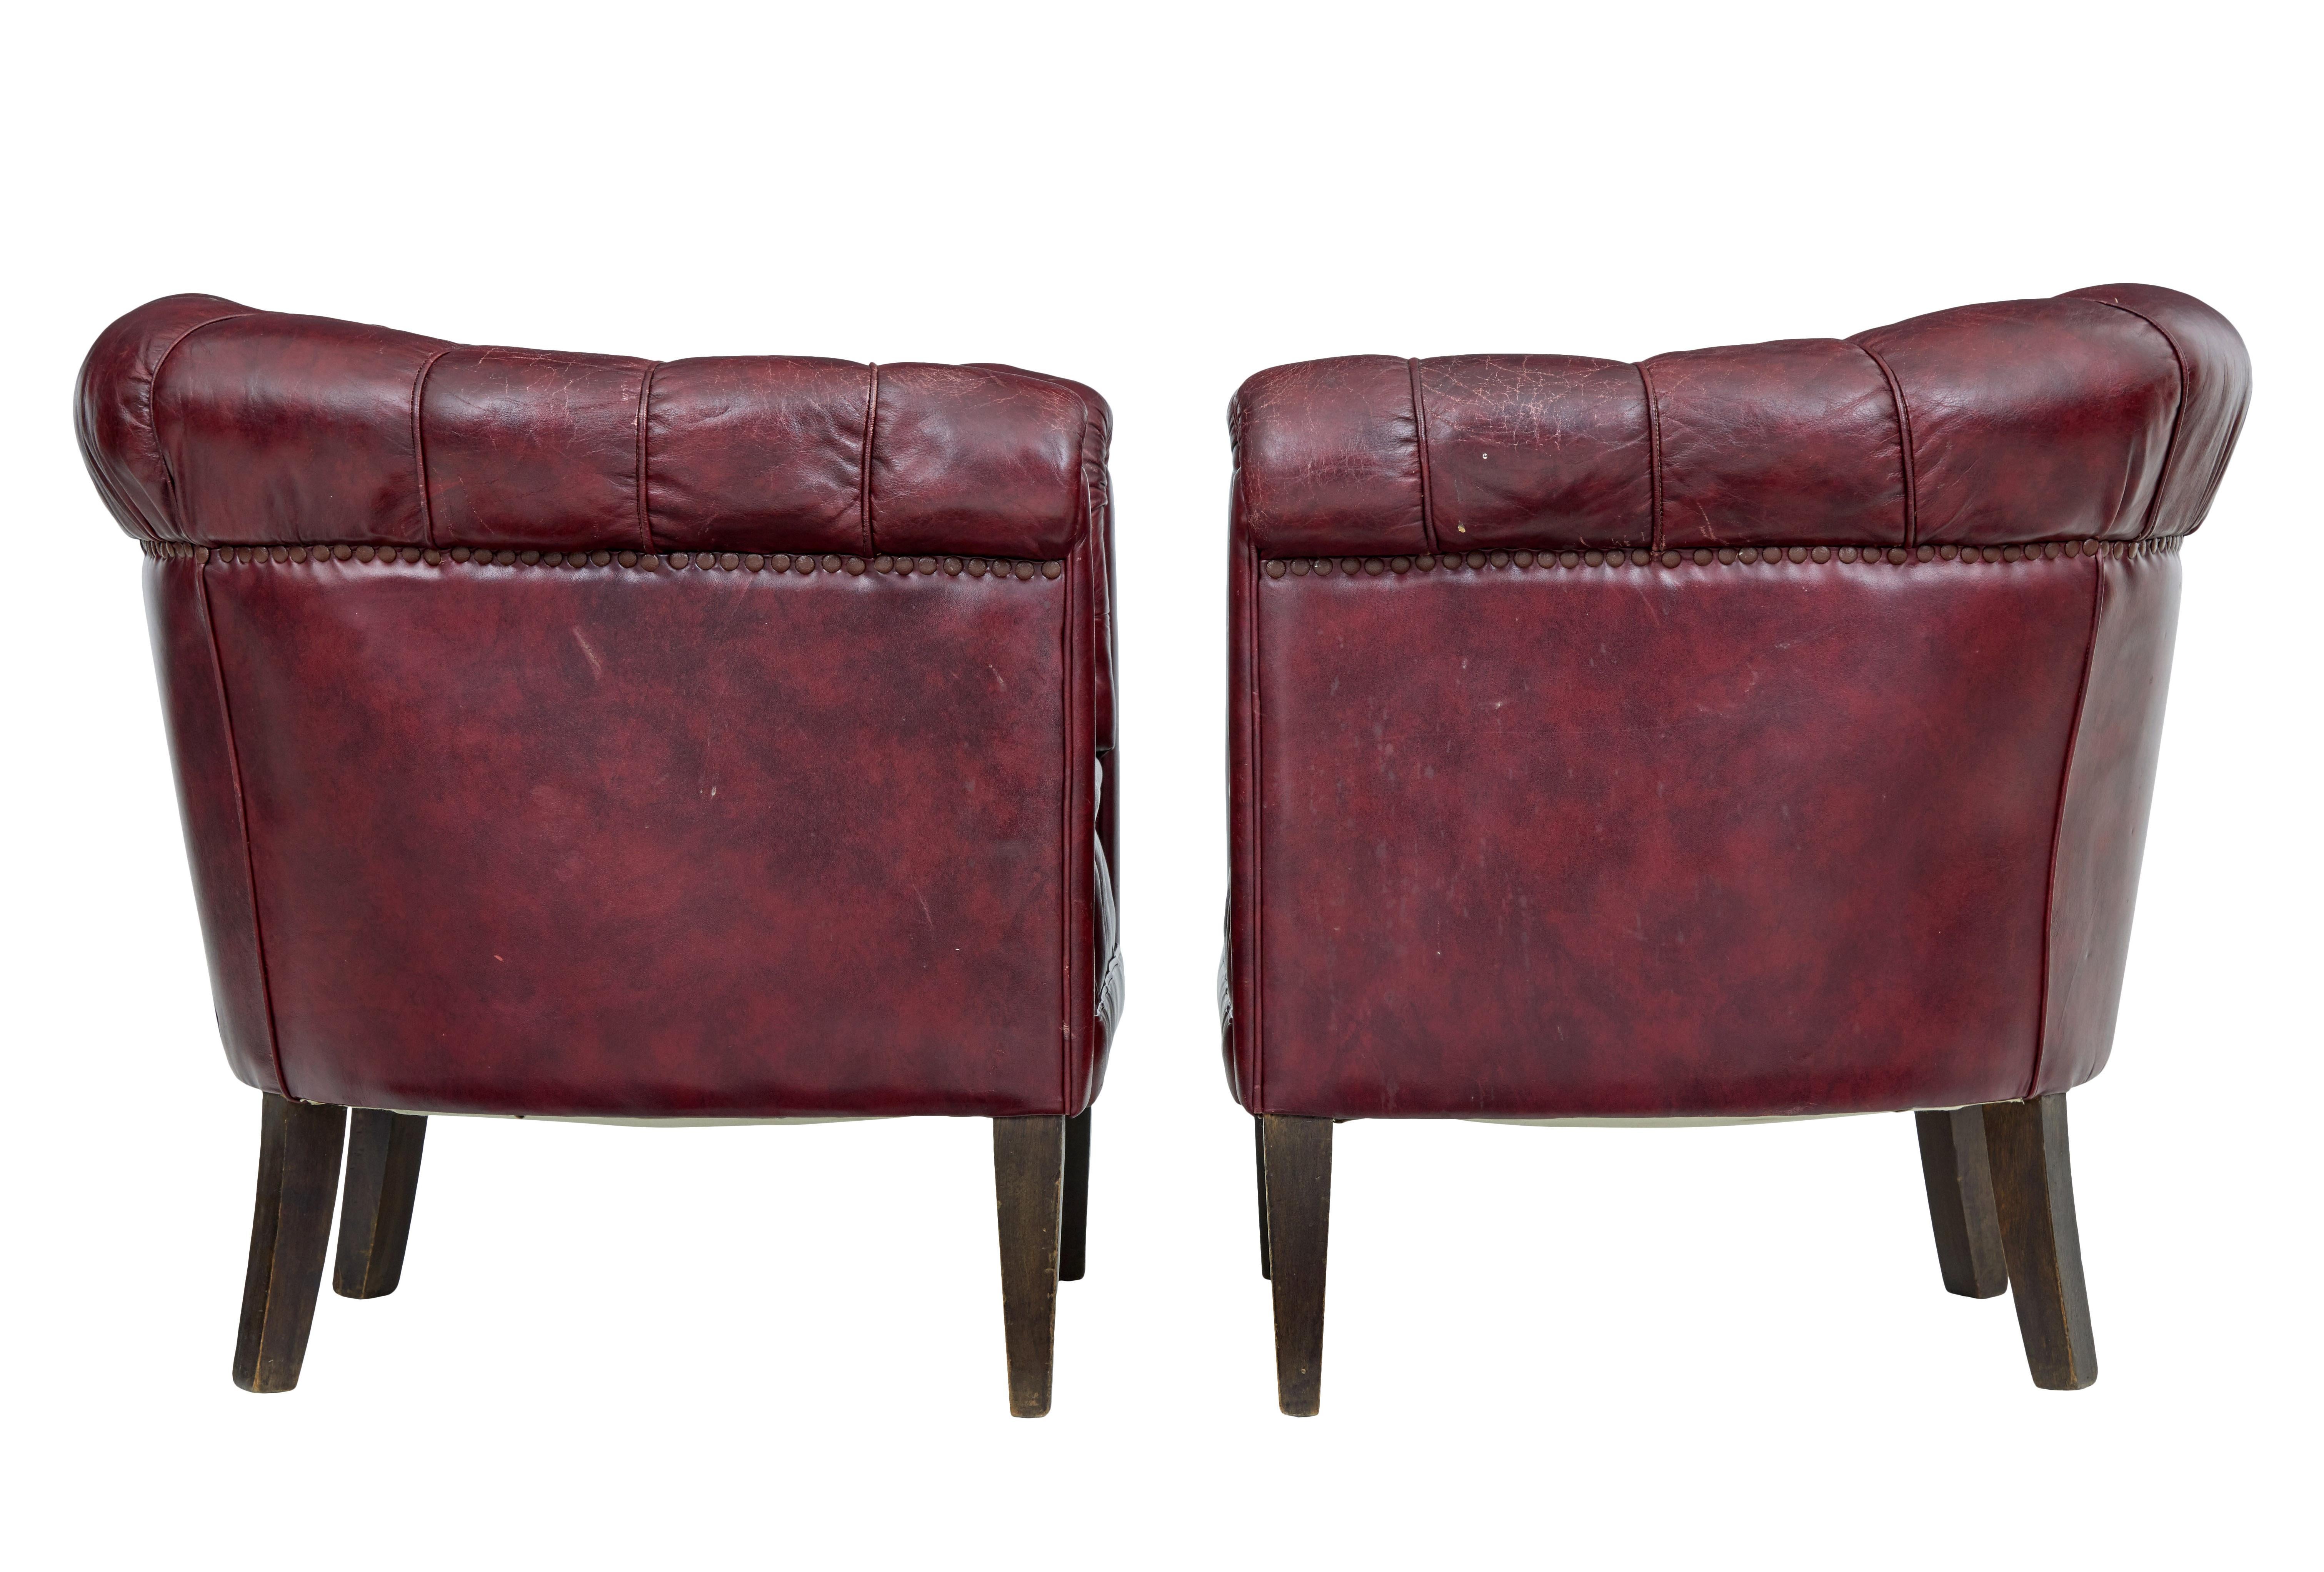 Edwardian Pair of Mid-20th Century Red Leather Club Armchairs